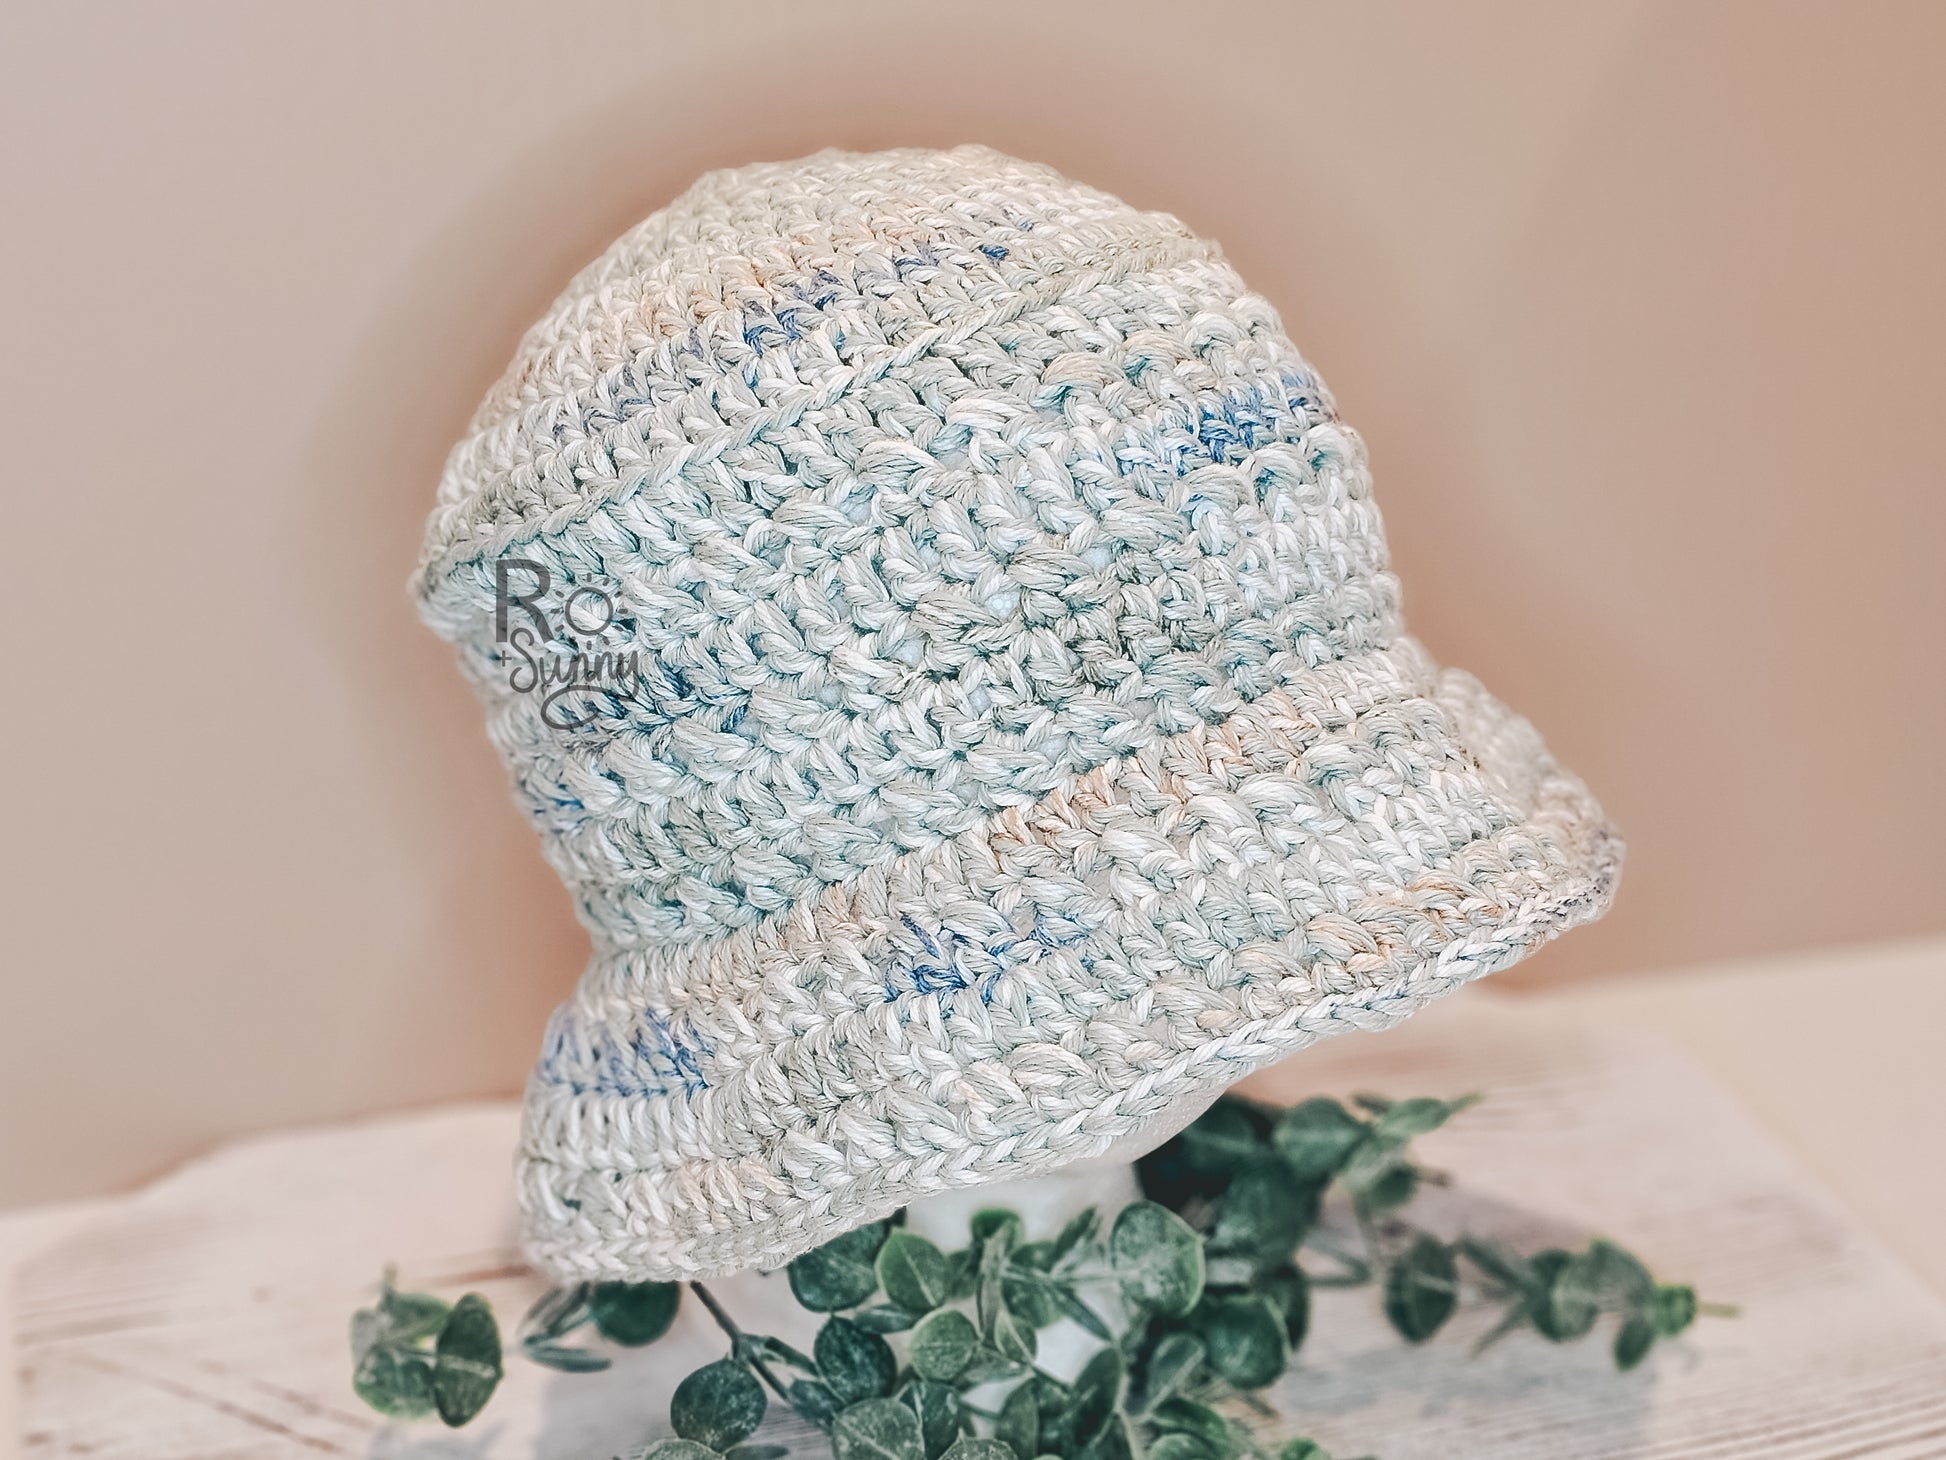 Bucket Hat in the color Seaside - Varieagated Blue, Green, White, Tan